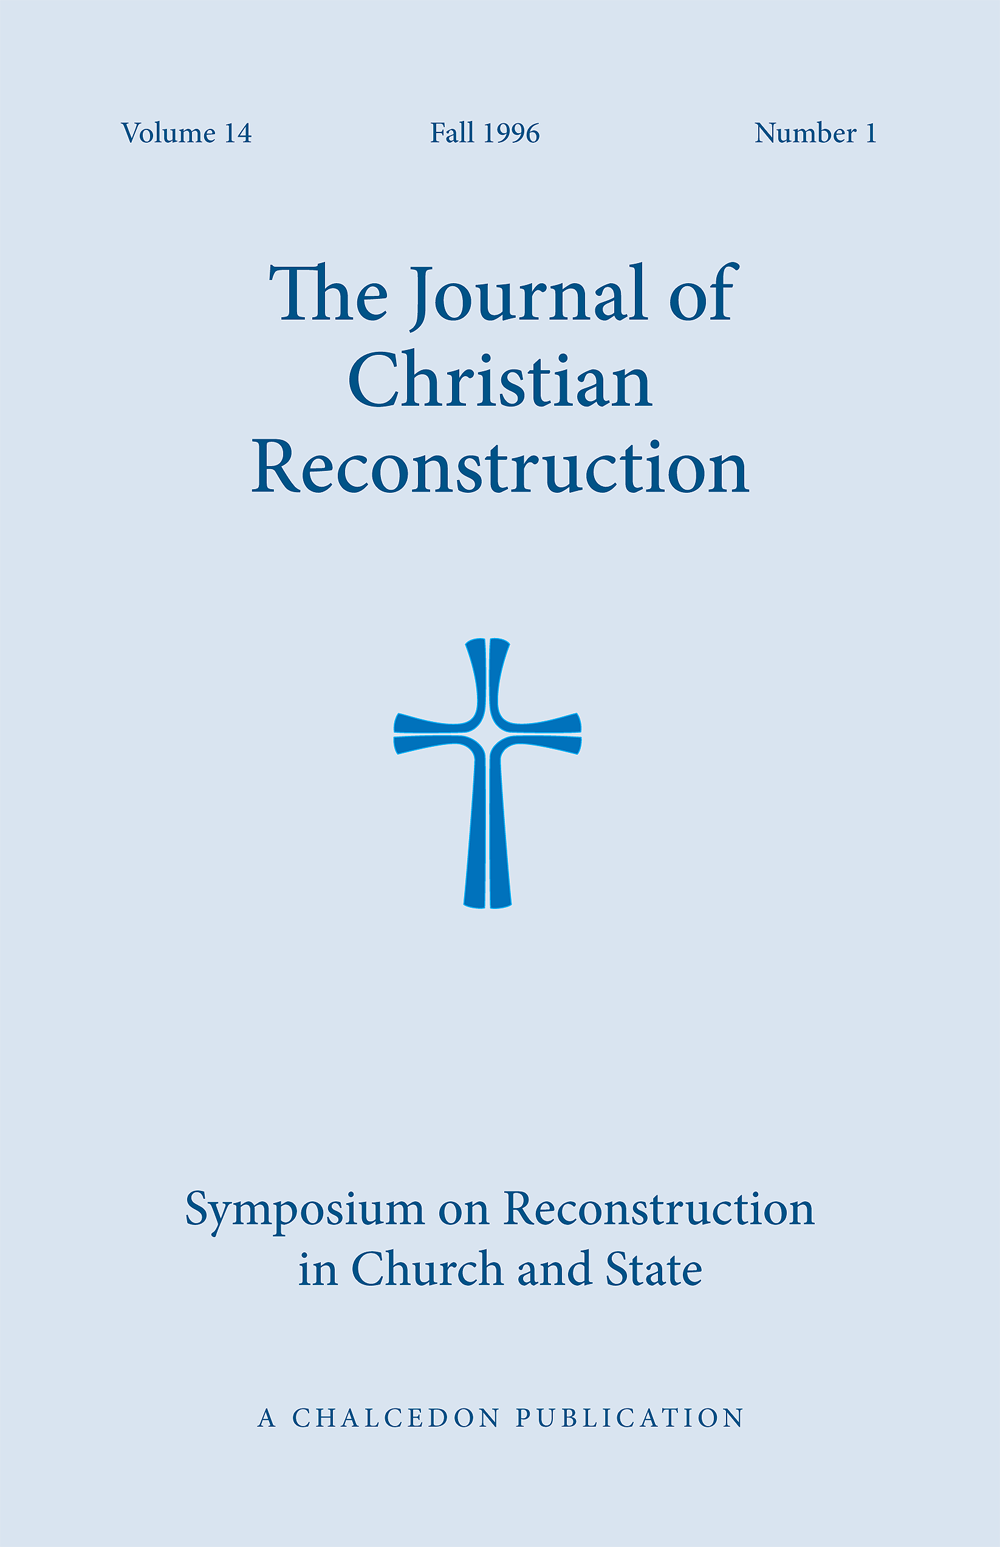 JCR Vol 14 No 1: Symposium on Reconstruction in the Church and State